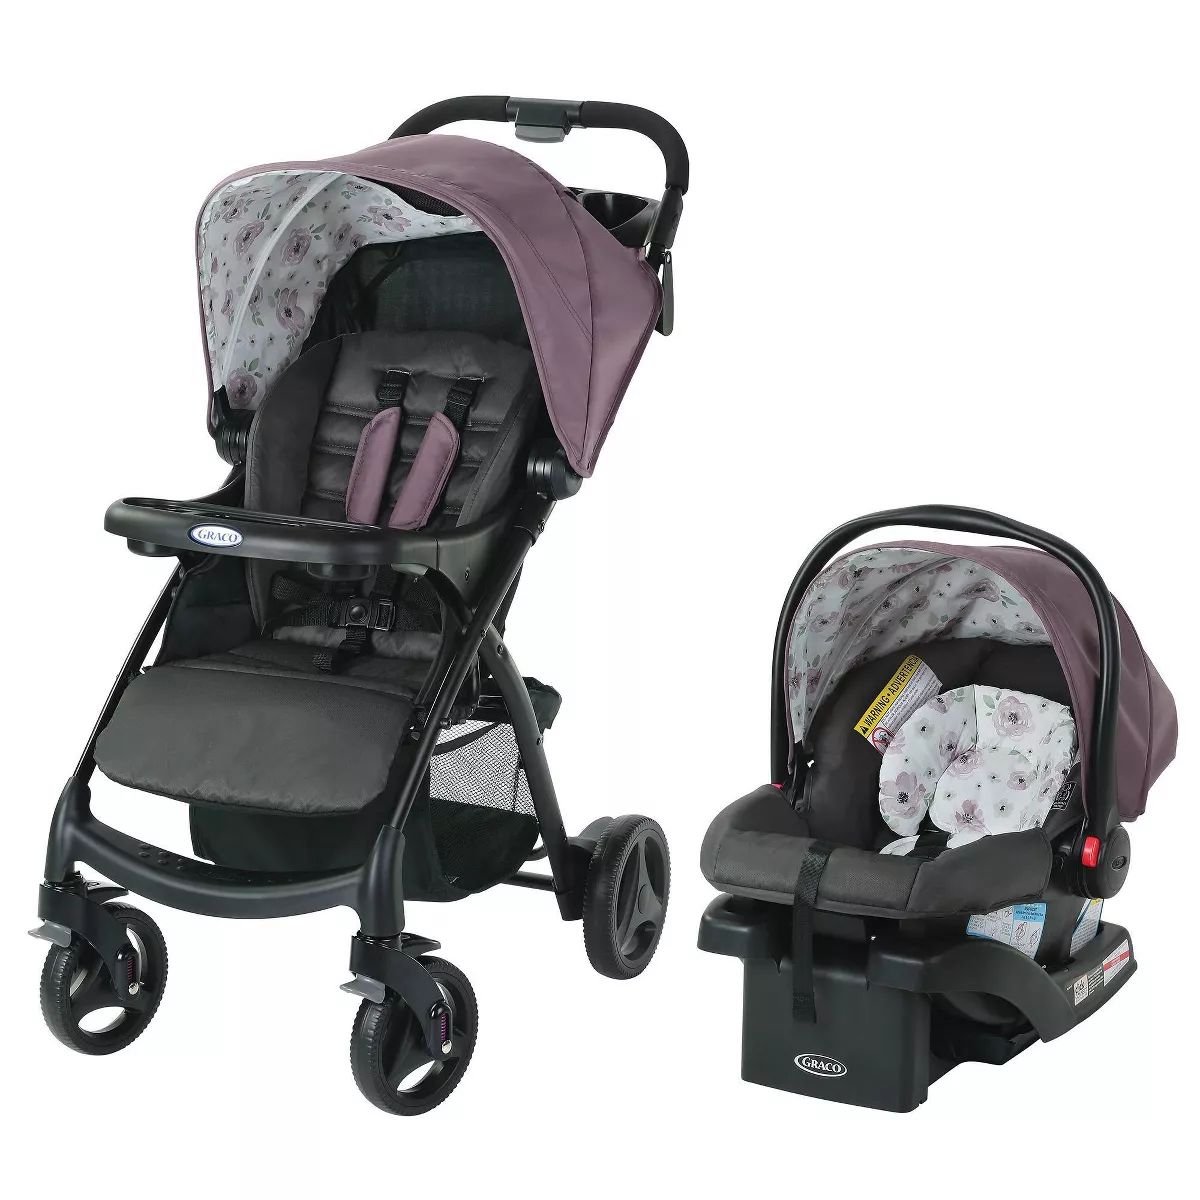 Graco Verb Click Connect Travel System with SnugRide Infant Car Seat | Target